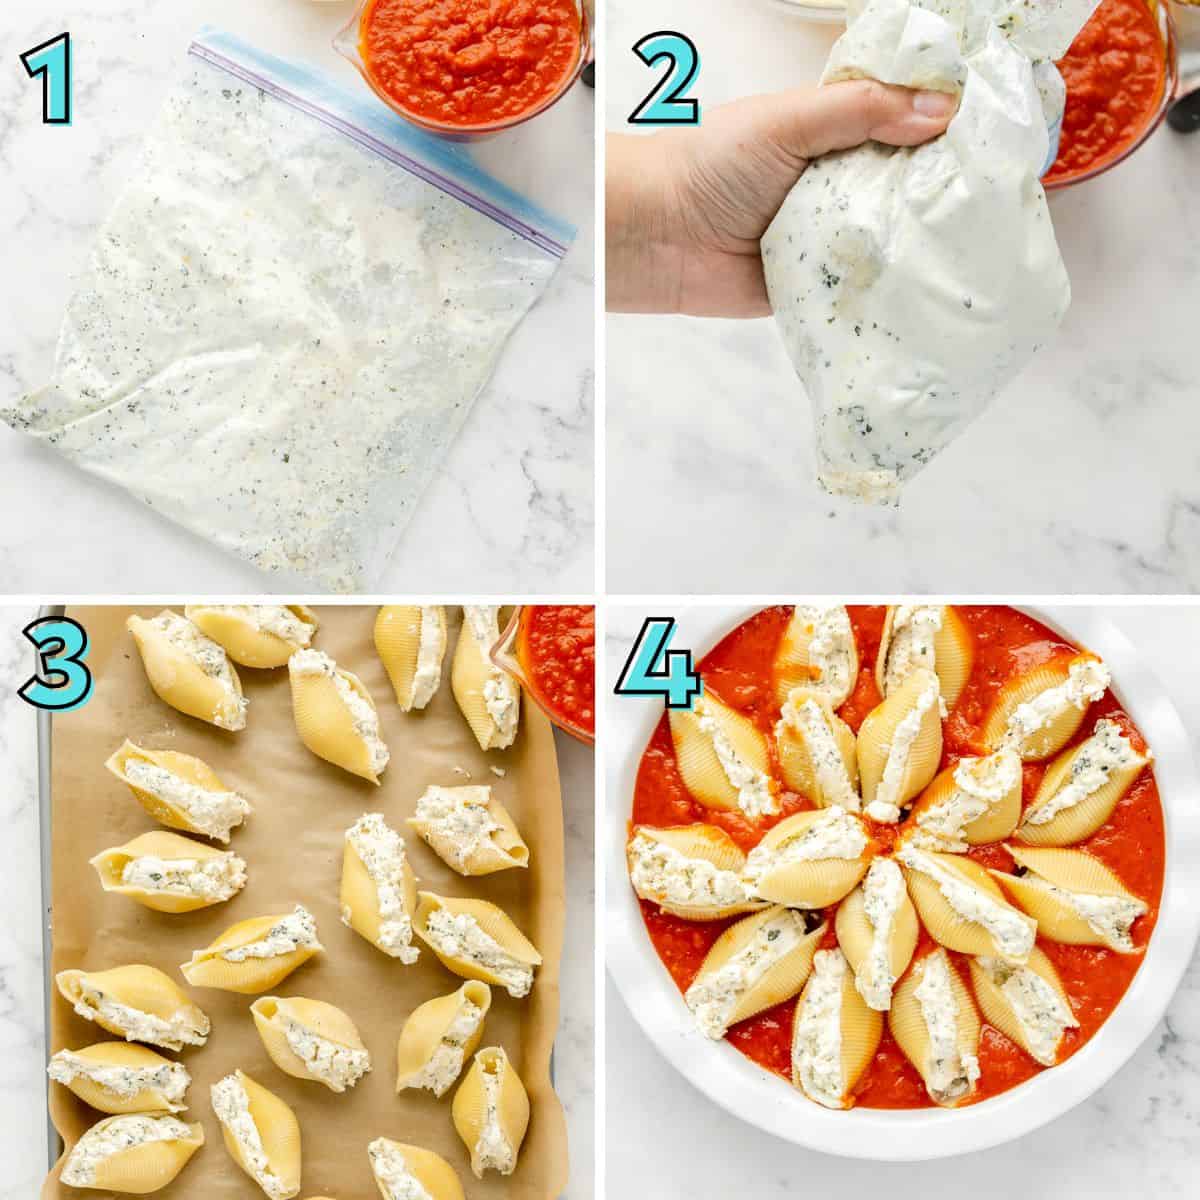 Step by step recipe instructions in a collage.